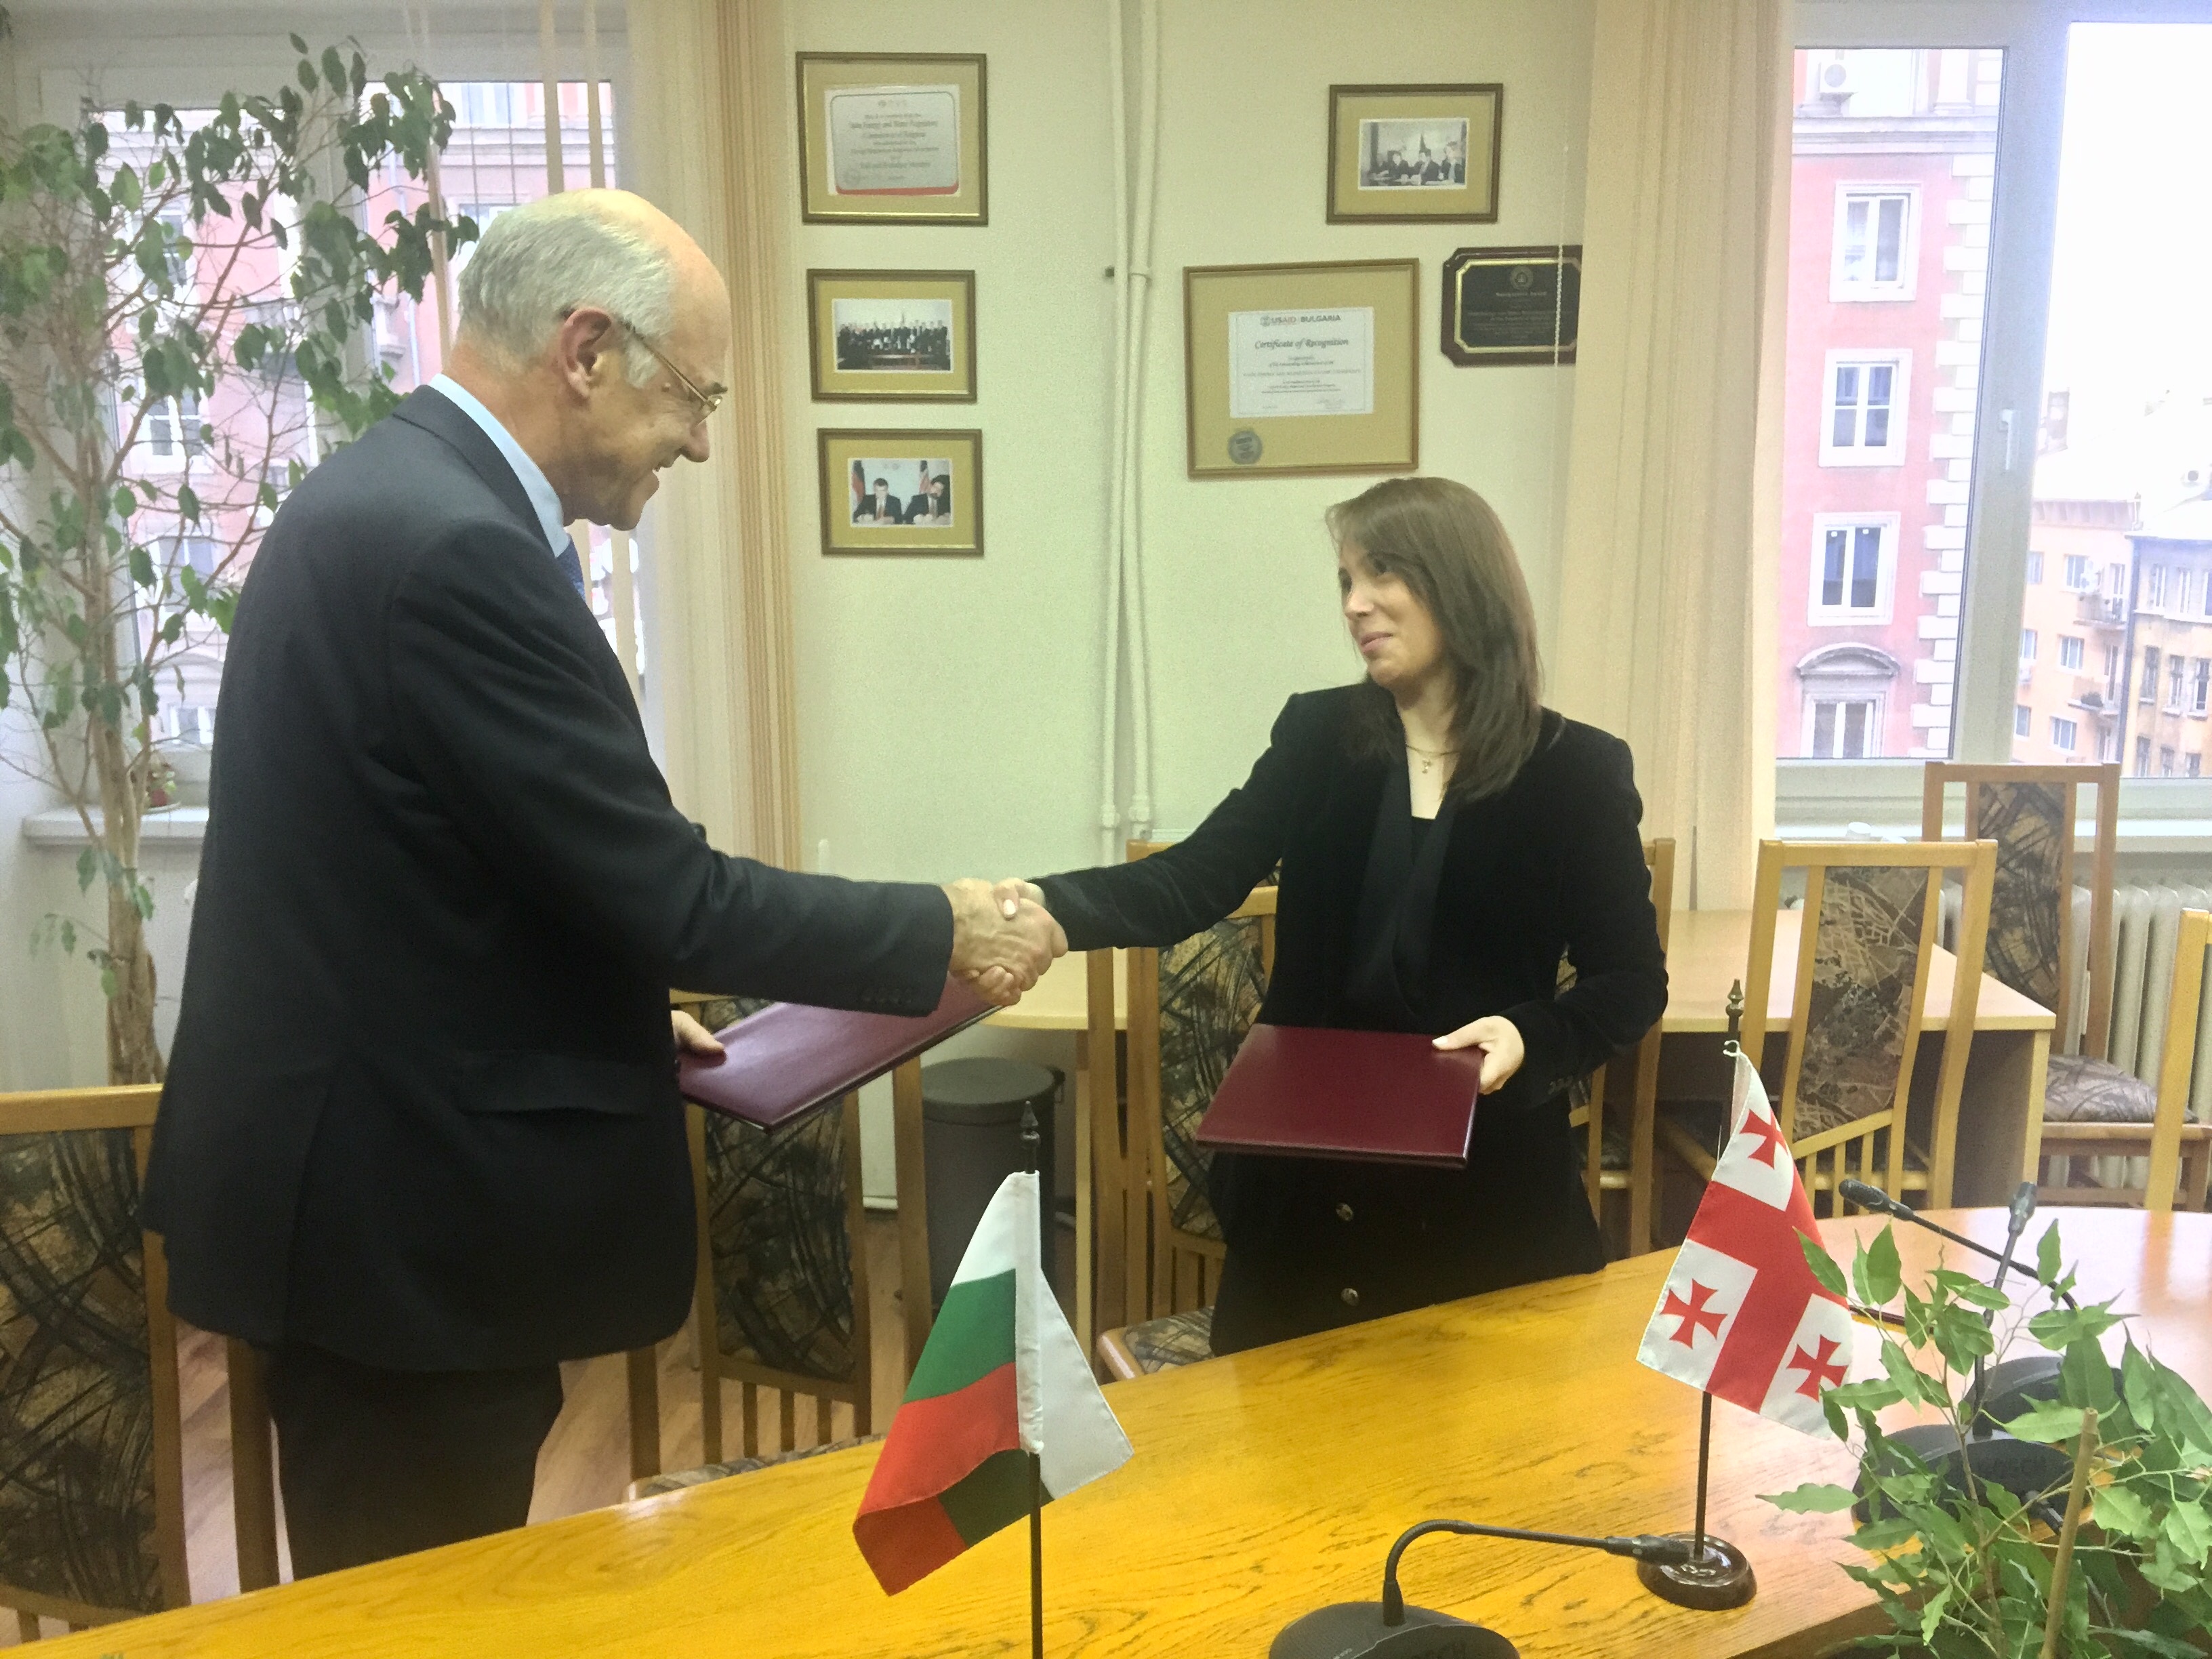 EWRC AND THE NATIONAL REGULATOR OF THE REPUBLIC OF GEORGIA SIGNED A COOPERATION AGREEMENT